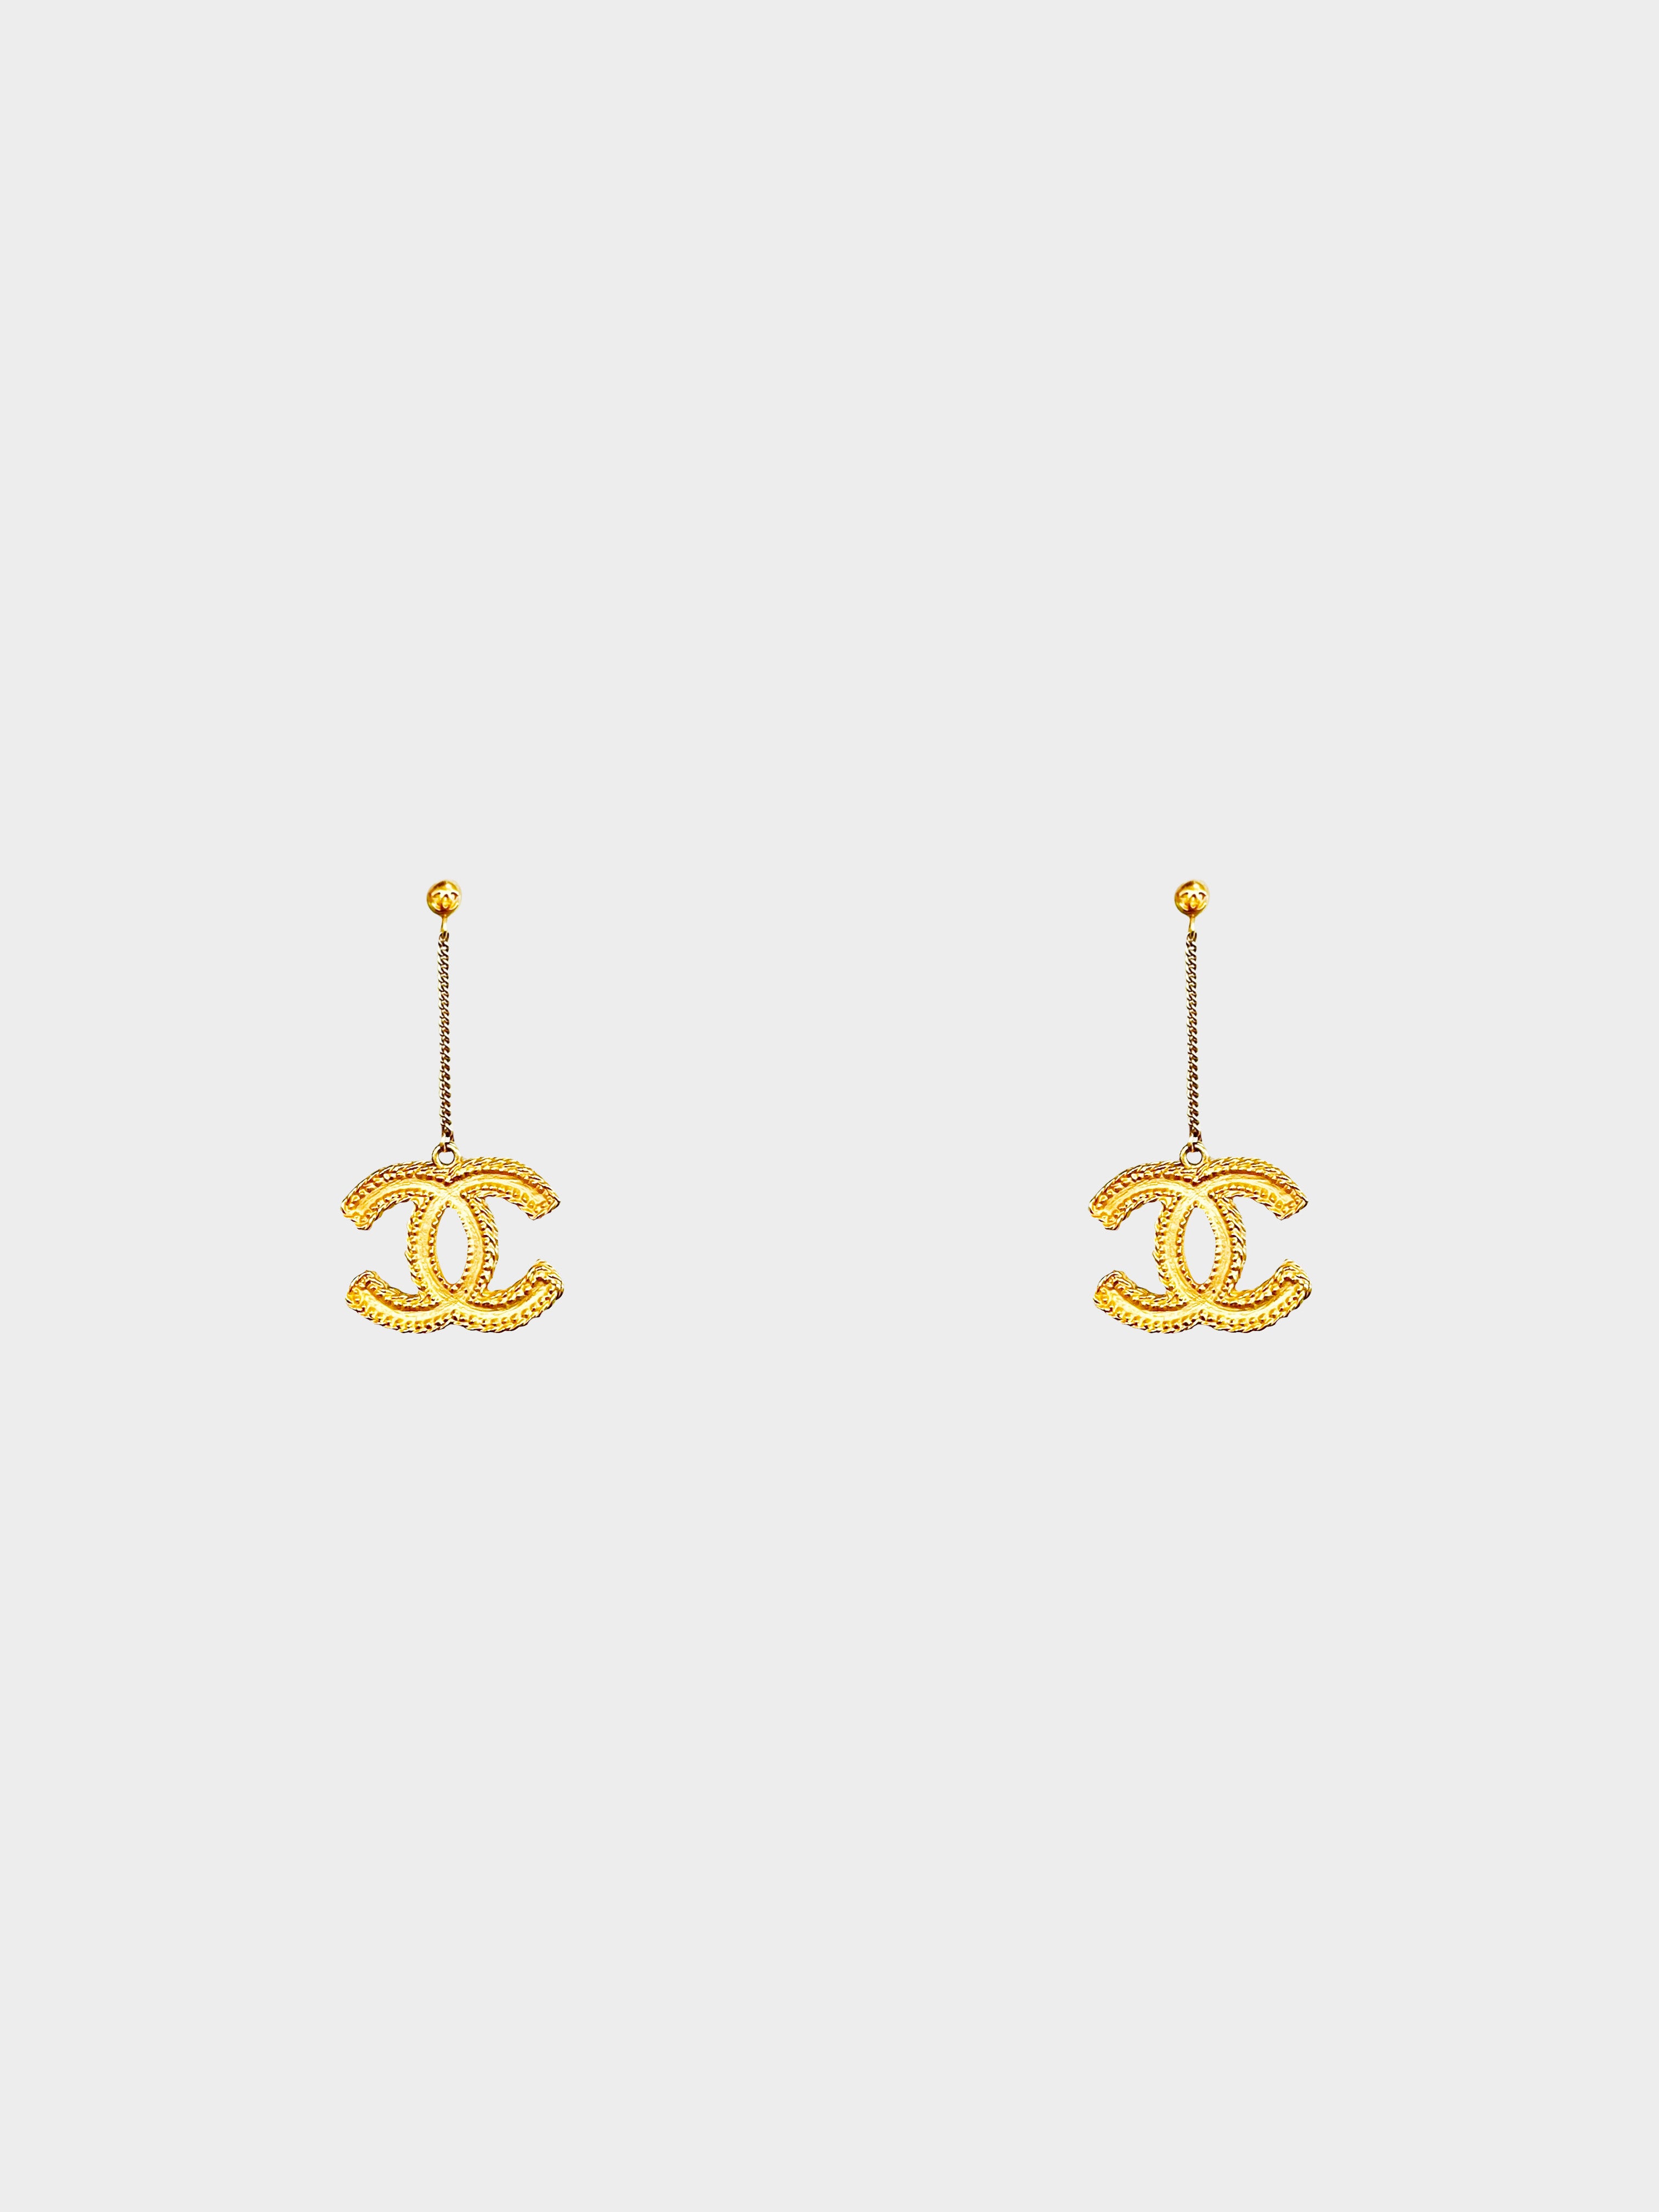 Authentic Chanel Gold Tone Pierced Drop Dangle Earrings Limited Ed. SOLD  OUT EUC | eBay